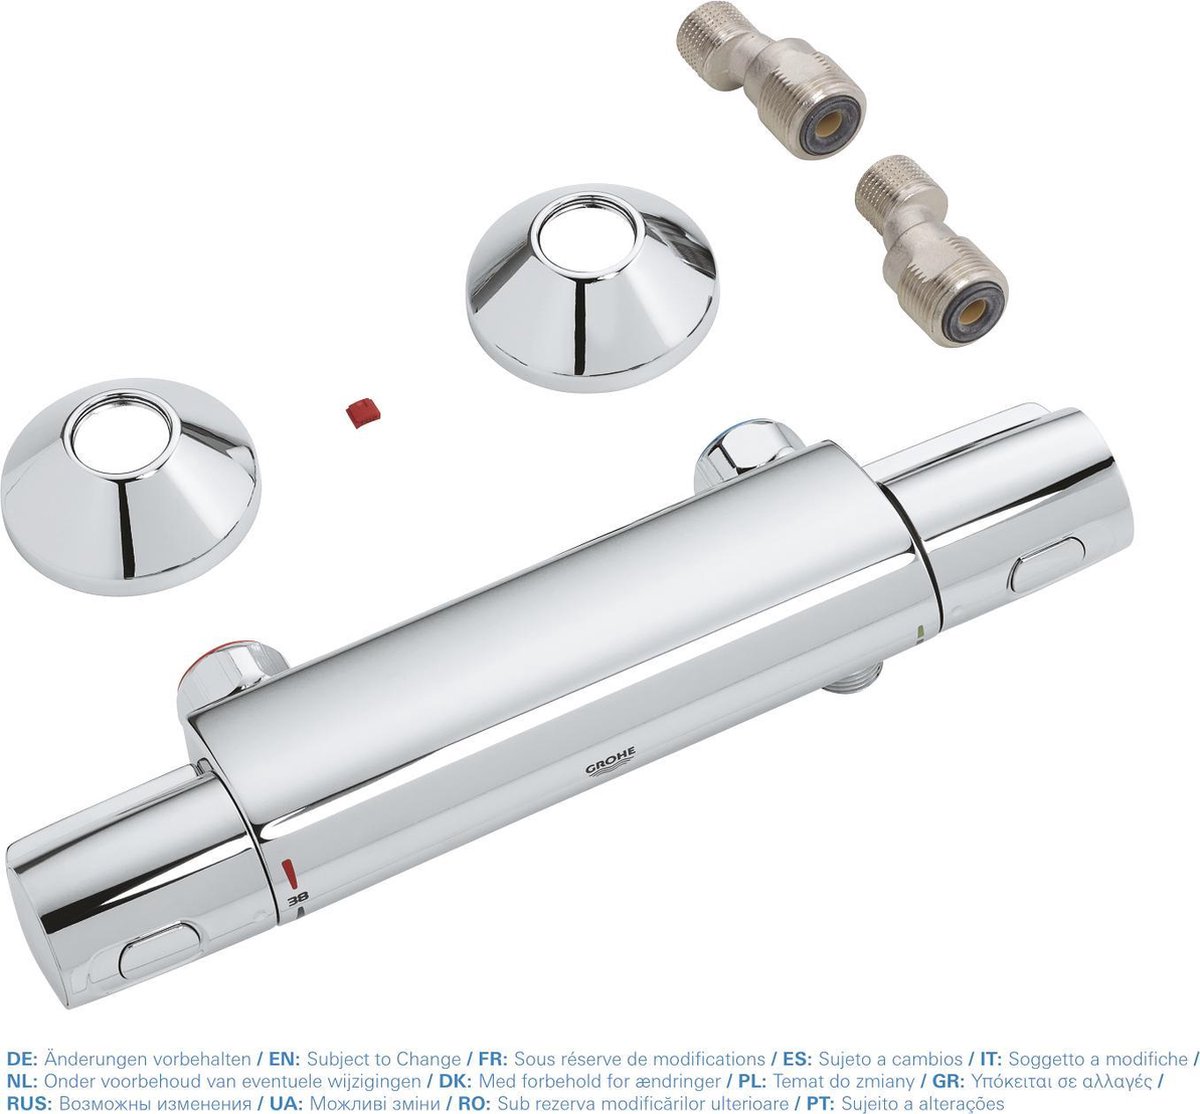 GROHE Precision Trend New Thermostatische Douchekraan - 15cm - CoolTouch - chroom bol.com